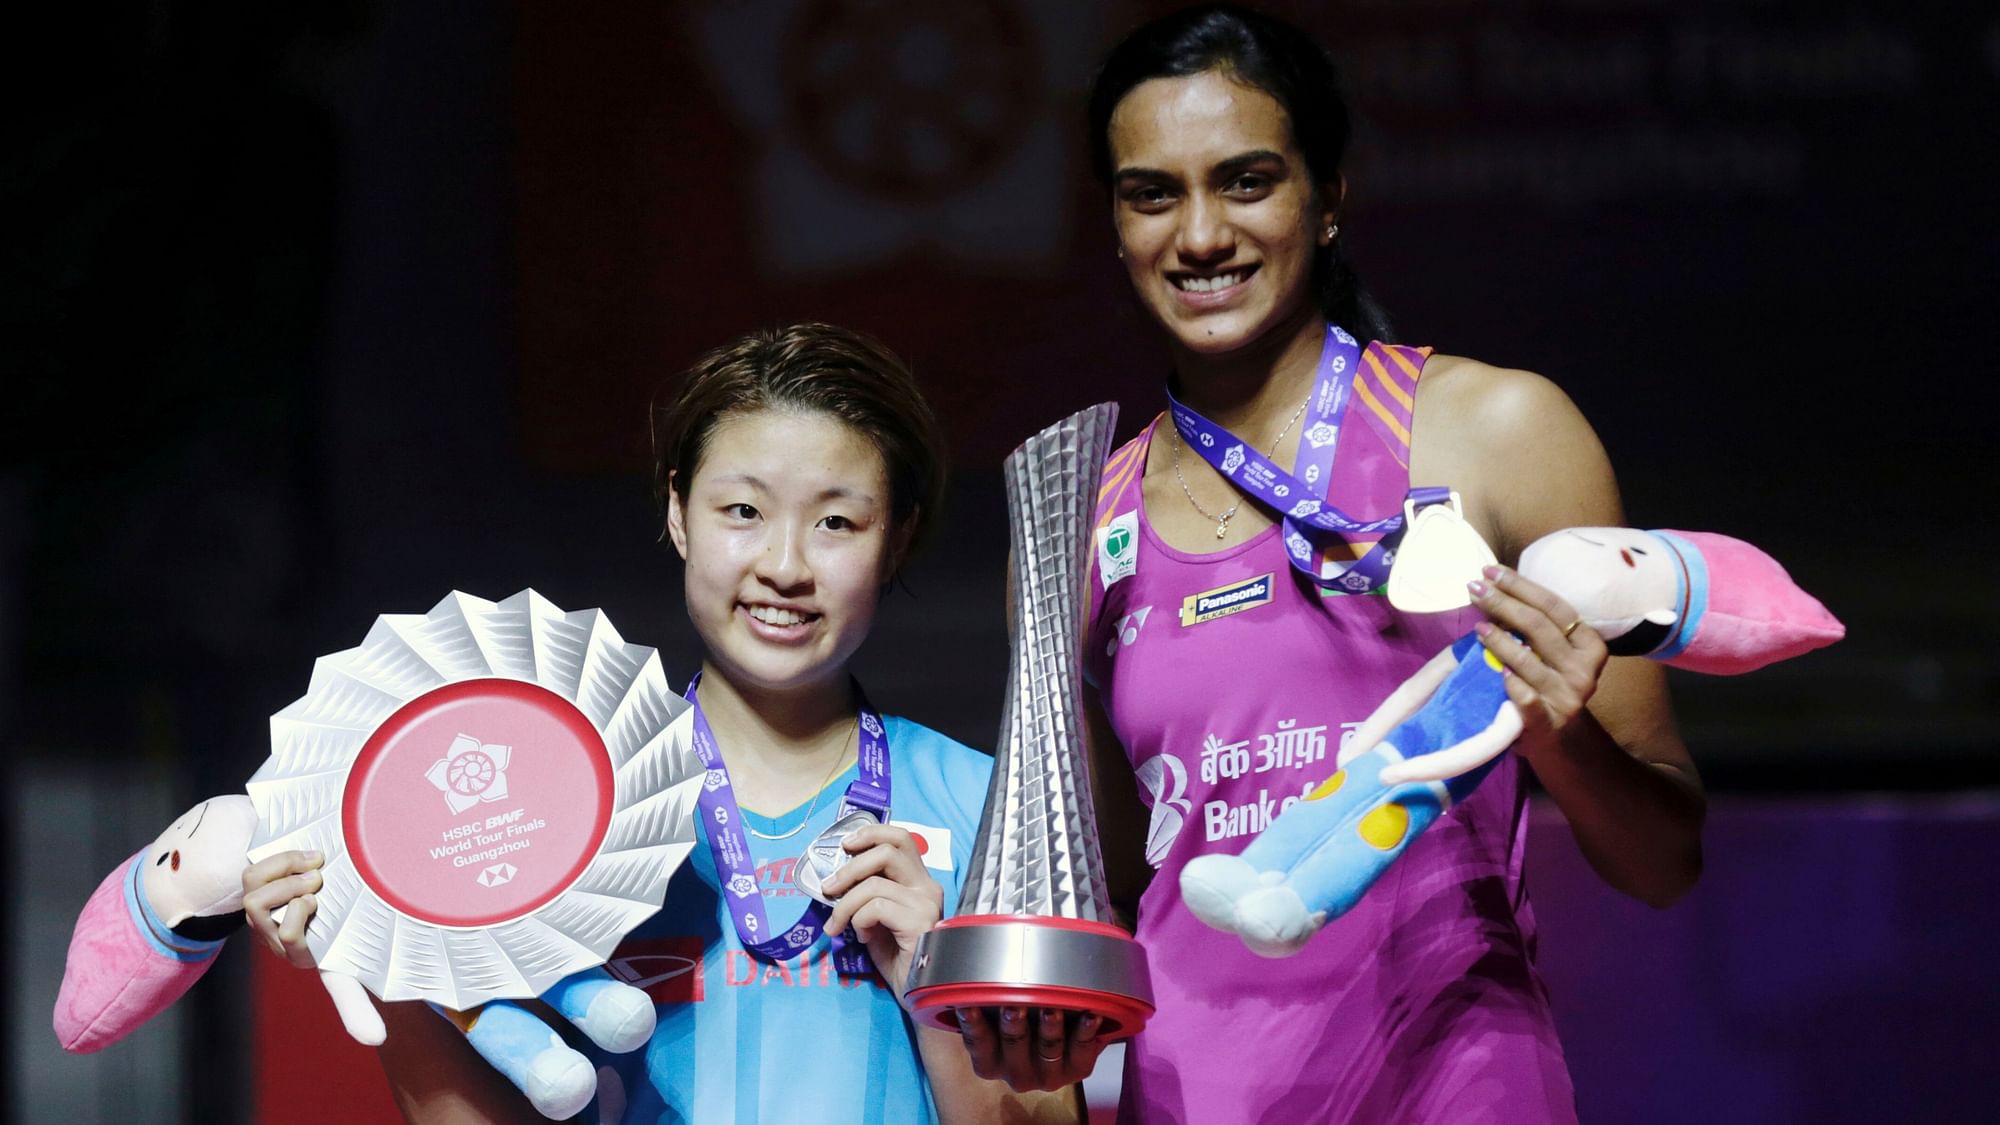 PV Sindhu and Nozomi Okuhara (left) at the trophy presentation after the BWF World Tour Finals at Guangzhou, China.